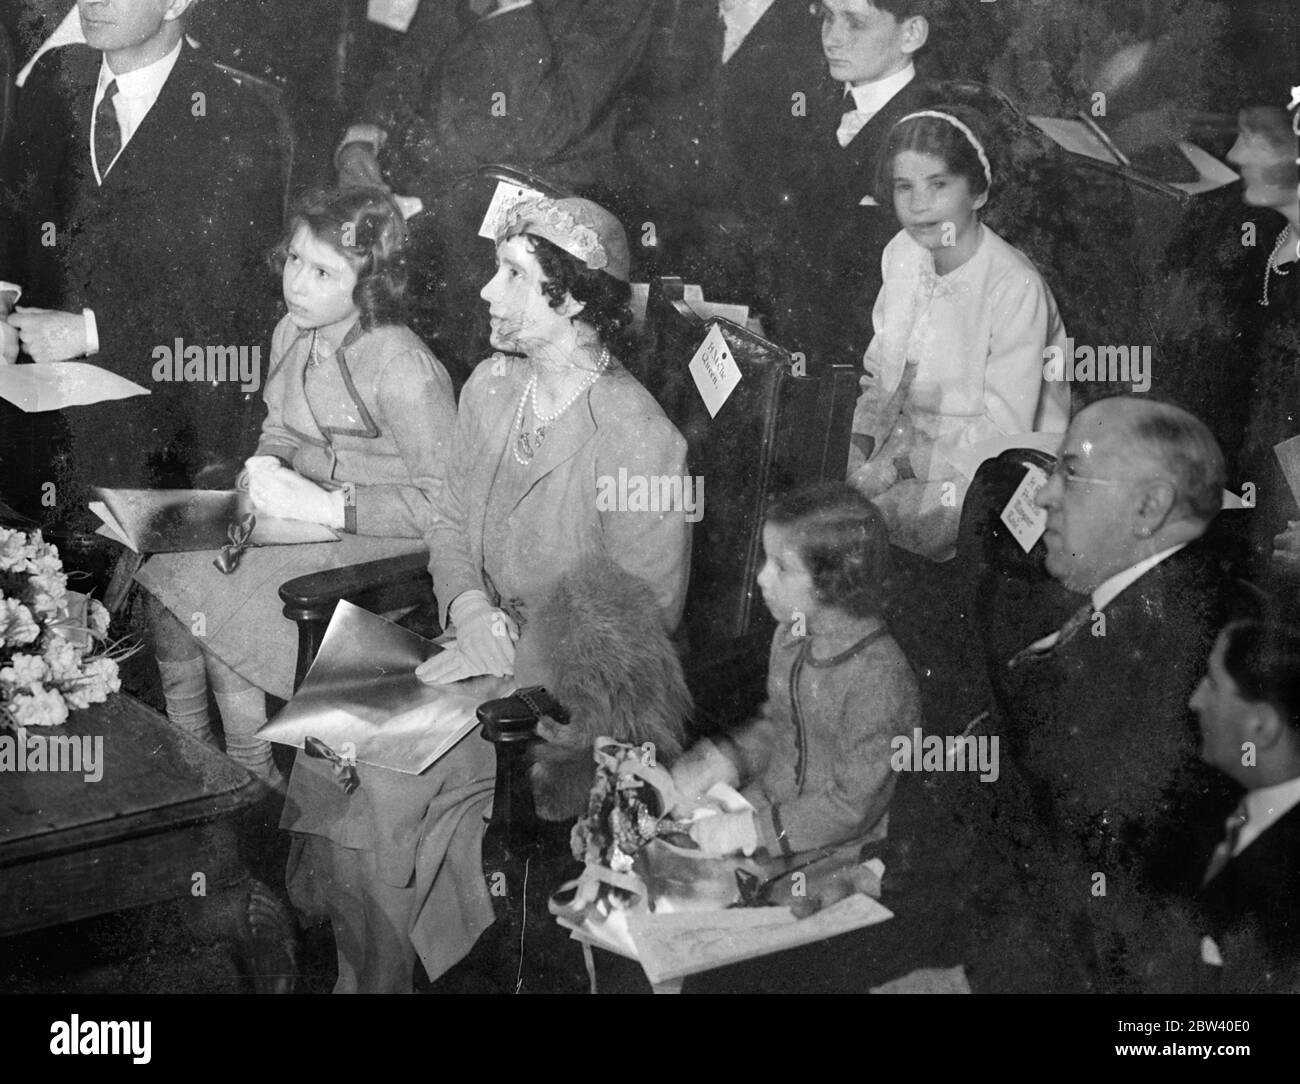 The Queen took her daughters, Princess Elizabeth and Princess Margaret Rose, to the Coronation Concert for Children at the Central Hall, Westminster. Photo shows: An expression of Princess Elizabeth as she listens to the concert. 6 April 1937 Stock Photo